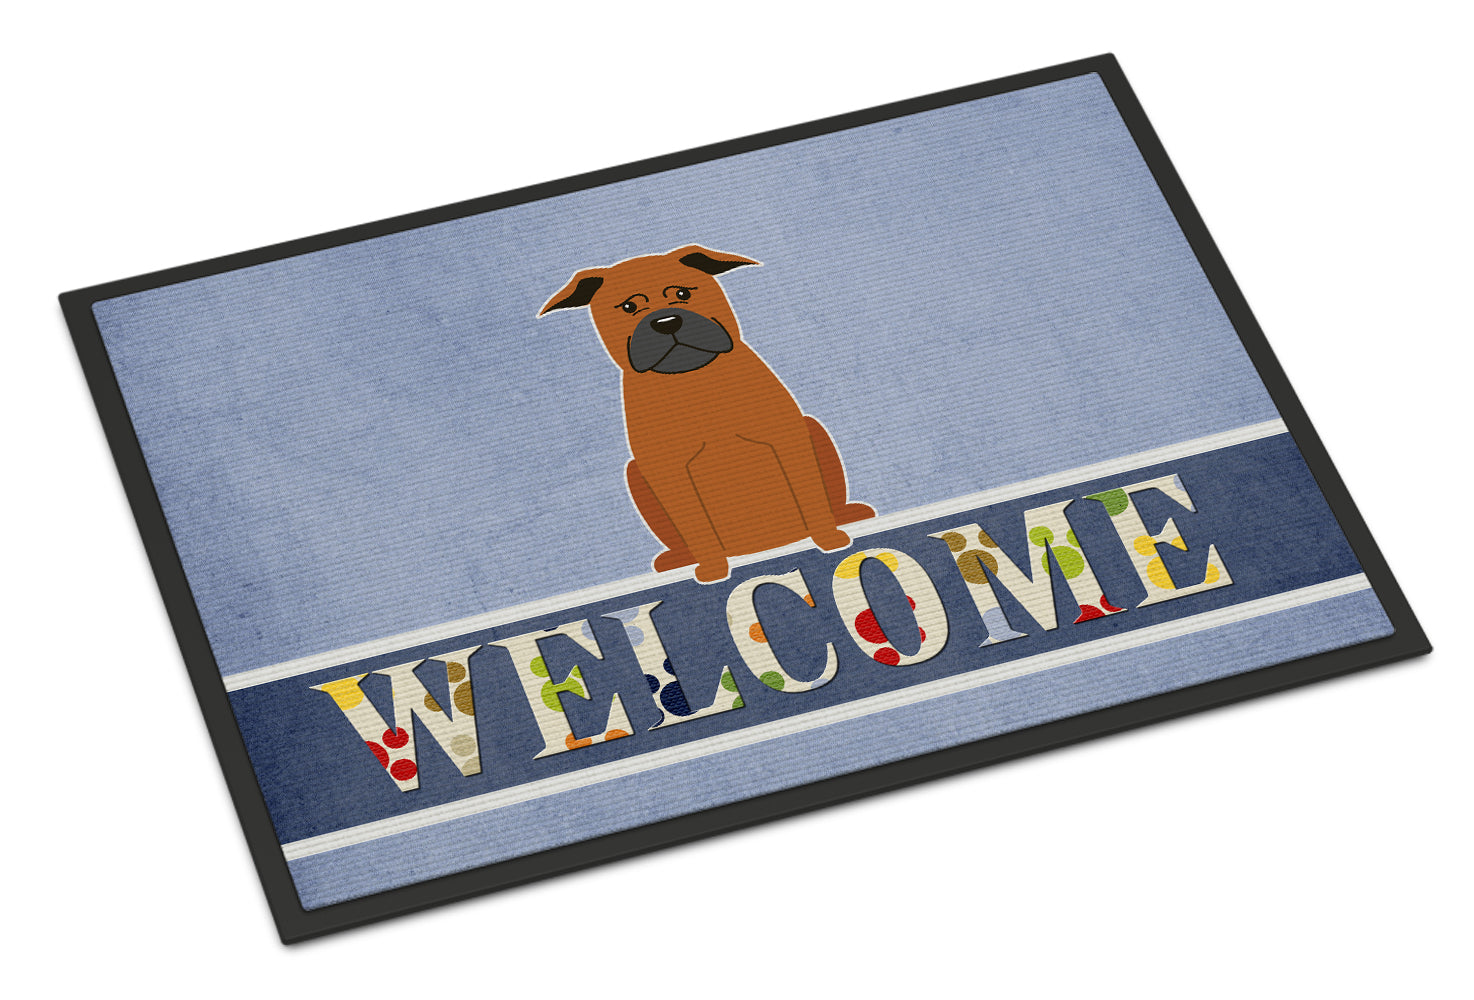 Chinese Chongqing Dog Welcome Indoor or Outdoor Mat 18x27 BB5692MAT - the-store.com